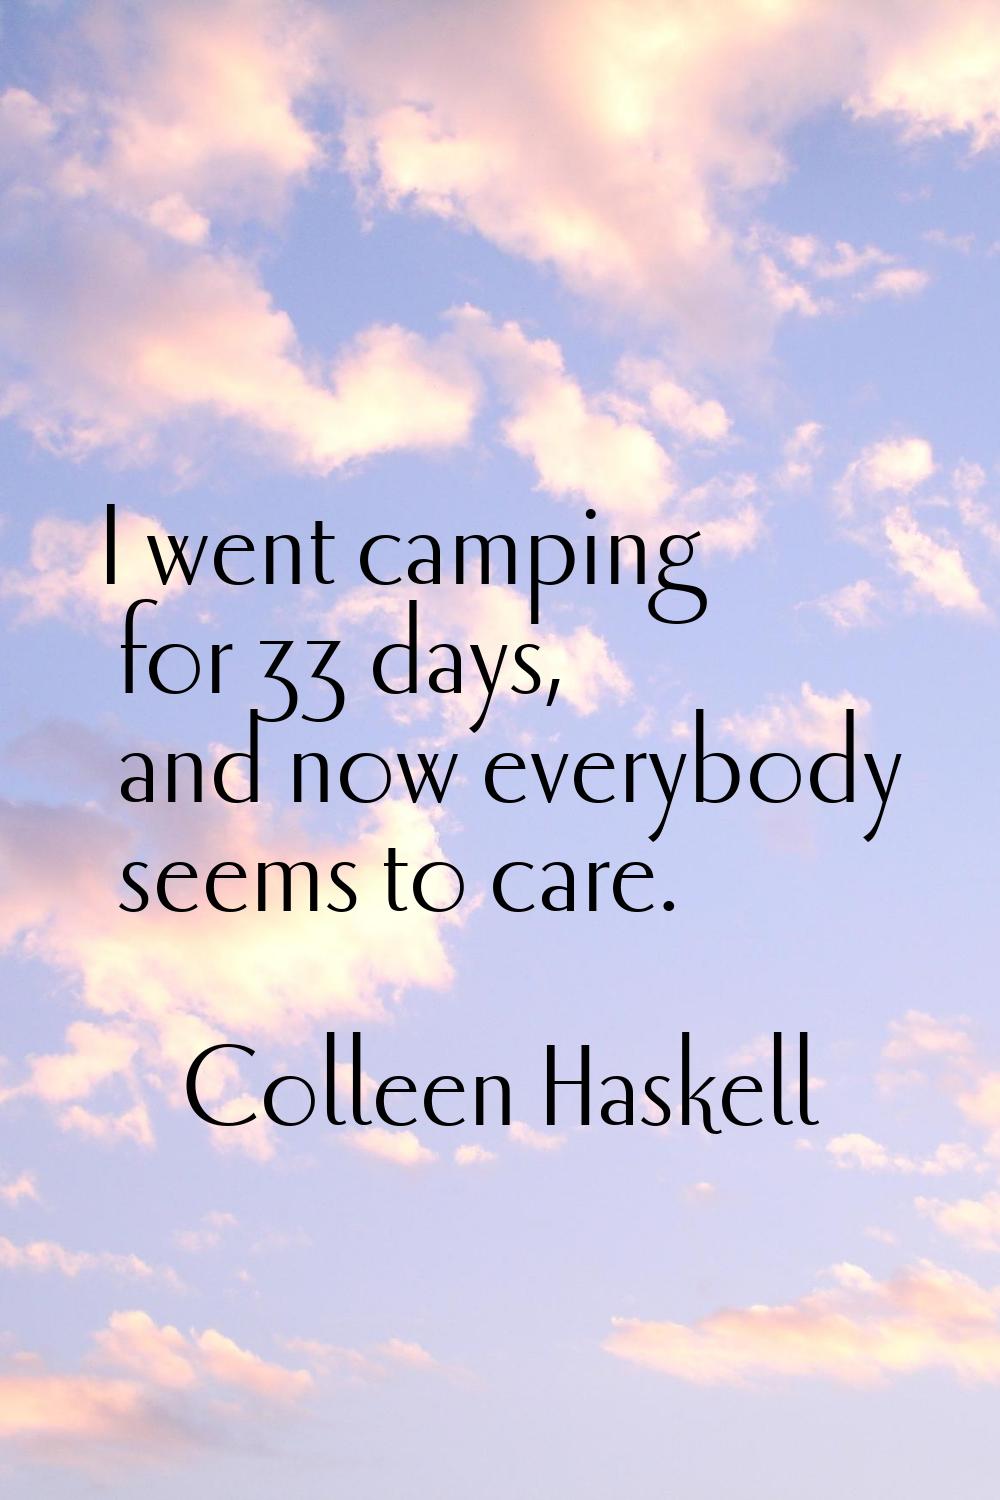 I went camping for 33 days, and now everybody seems to care.